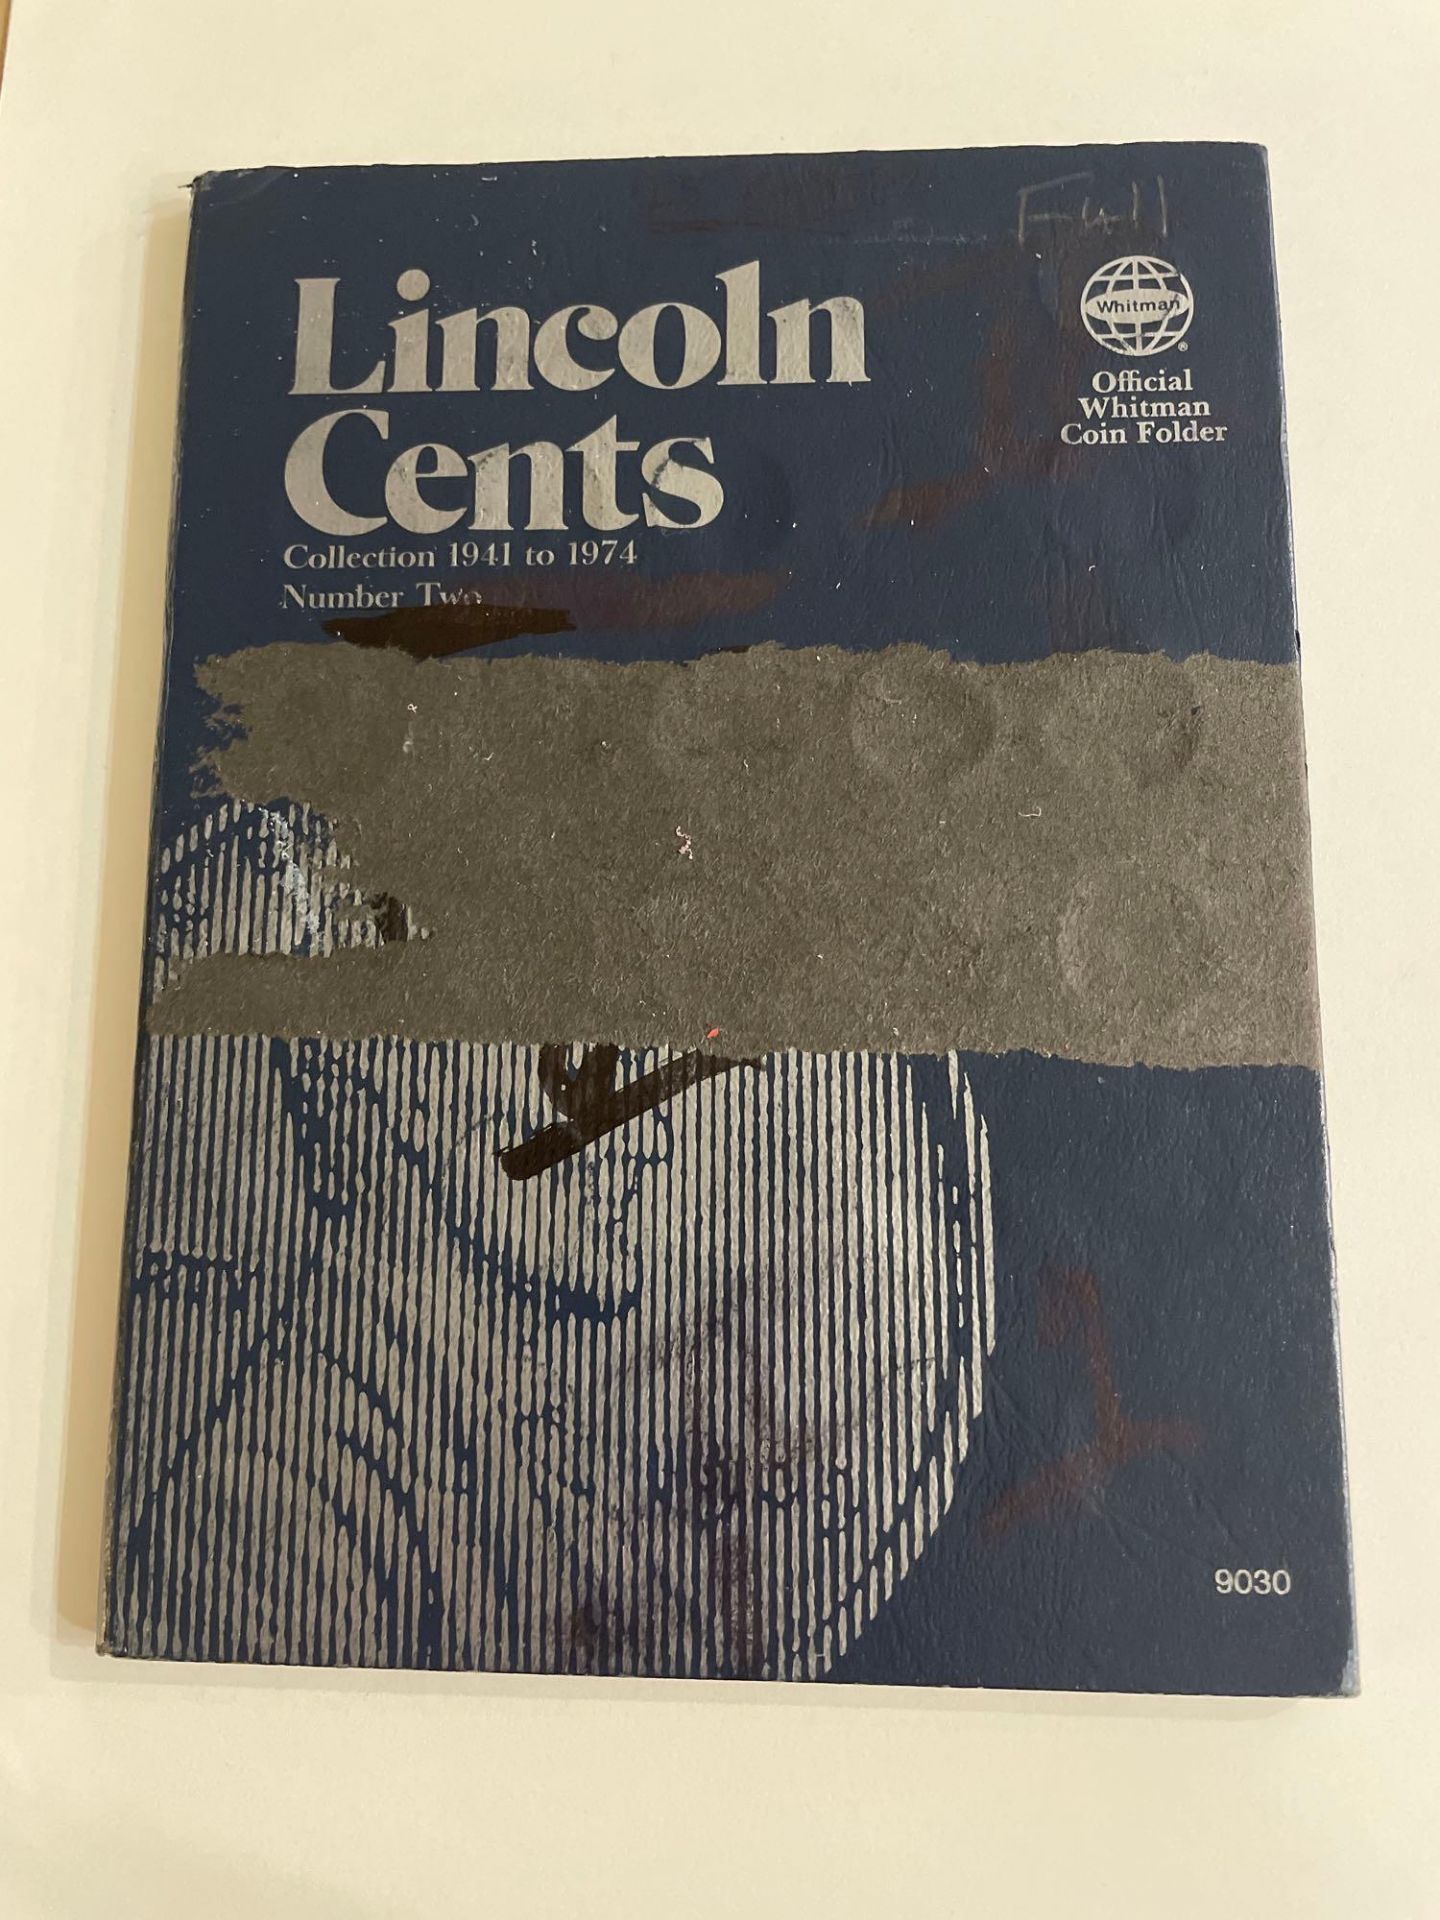 Lincoln Cents 1941 to 1974 #2